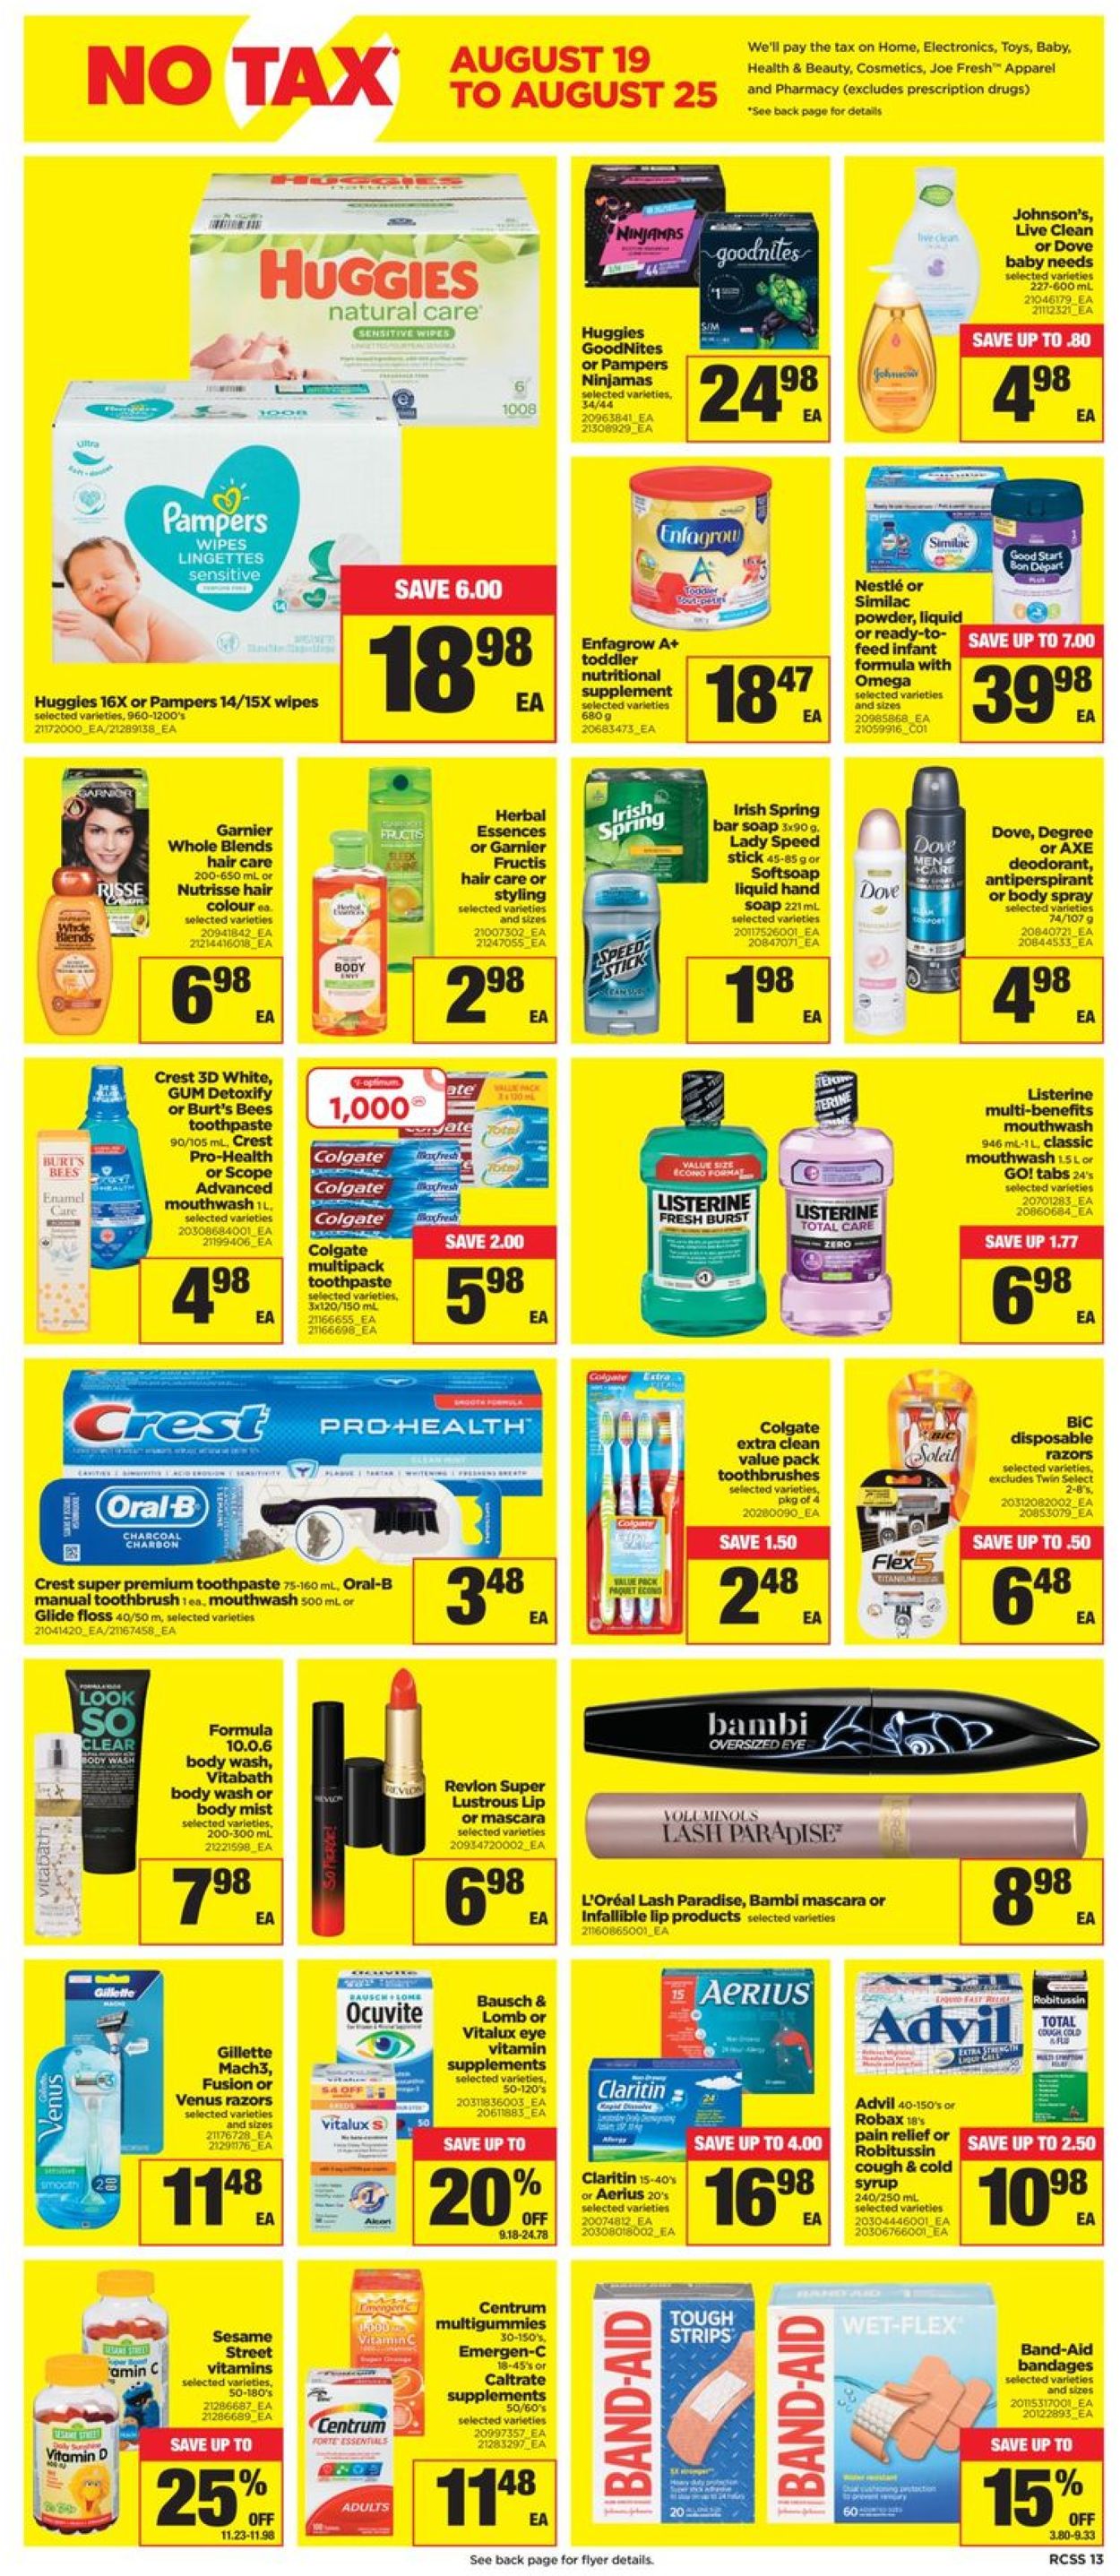 Real Canadian Superstore Flyer from 08/19/2021